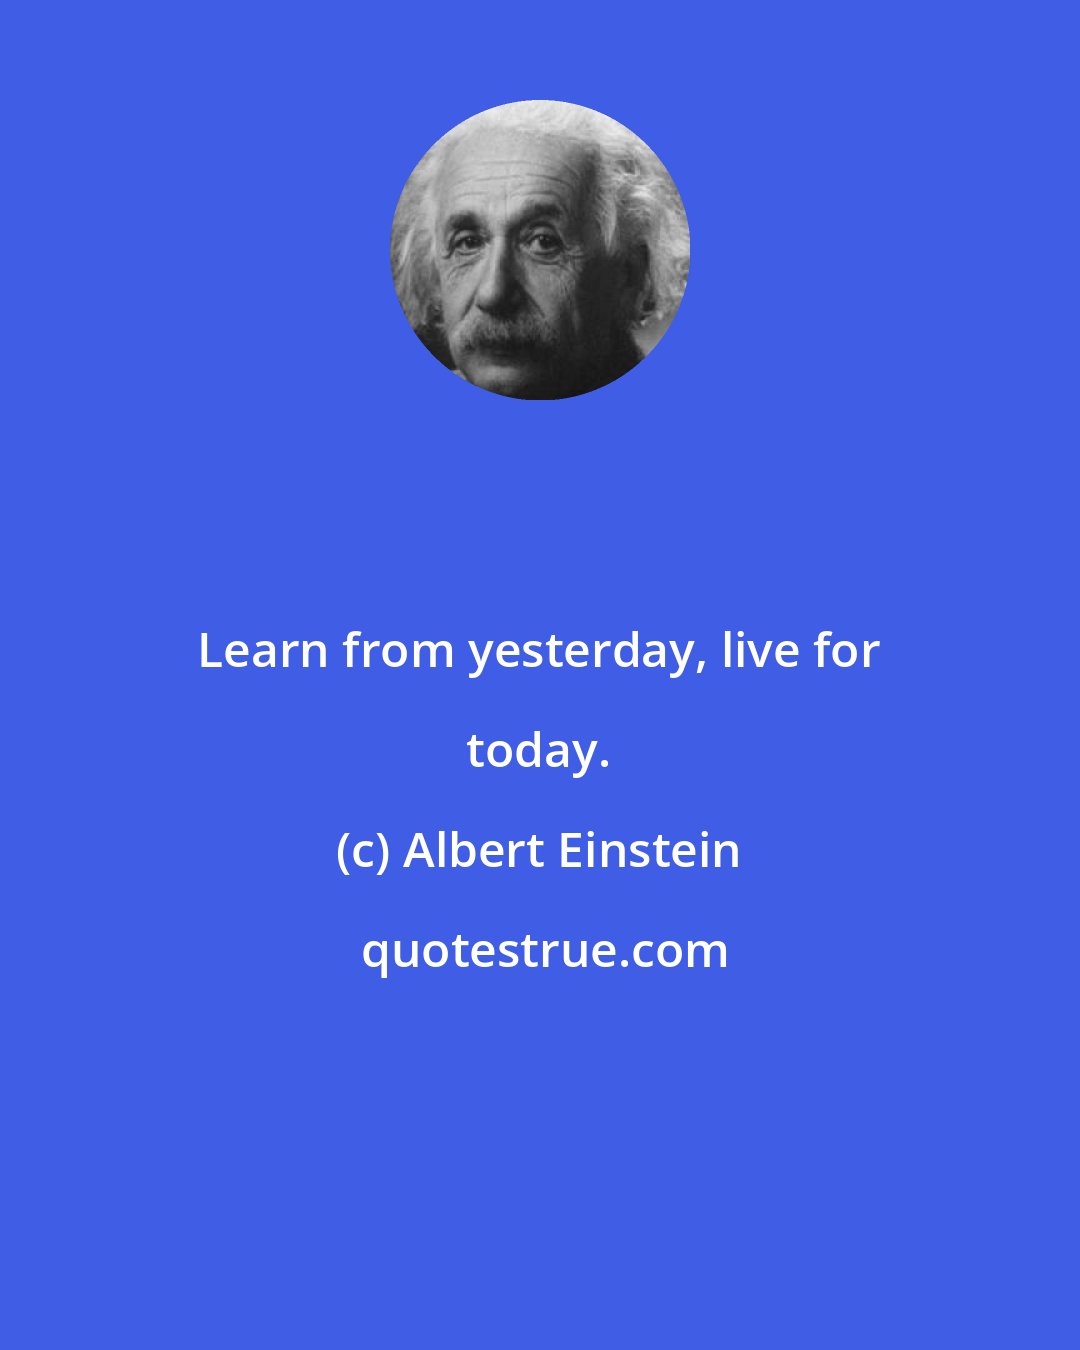 Albert Einstein: Learn from yesterday, live for today.